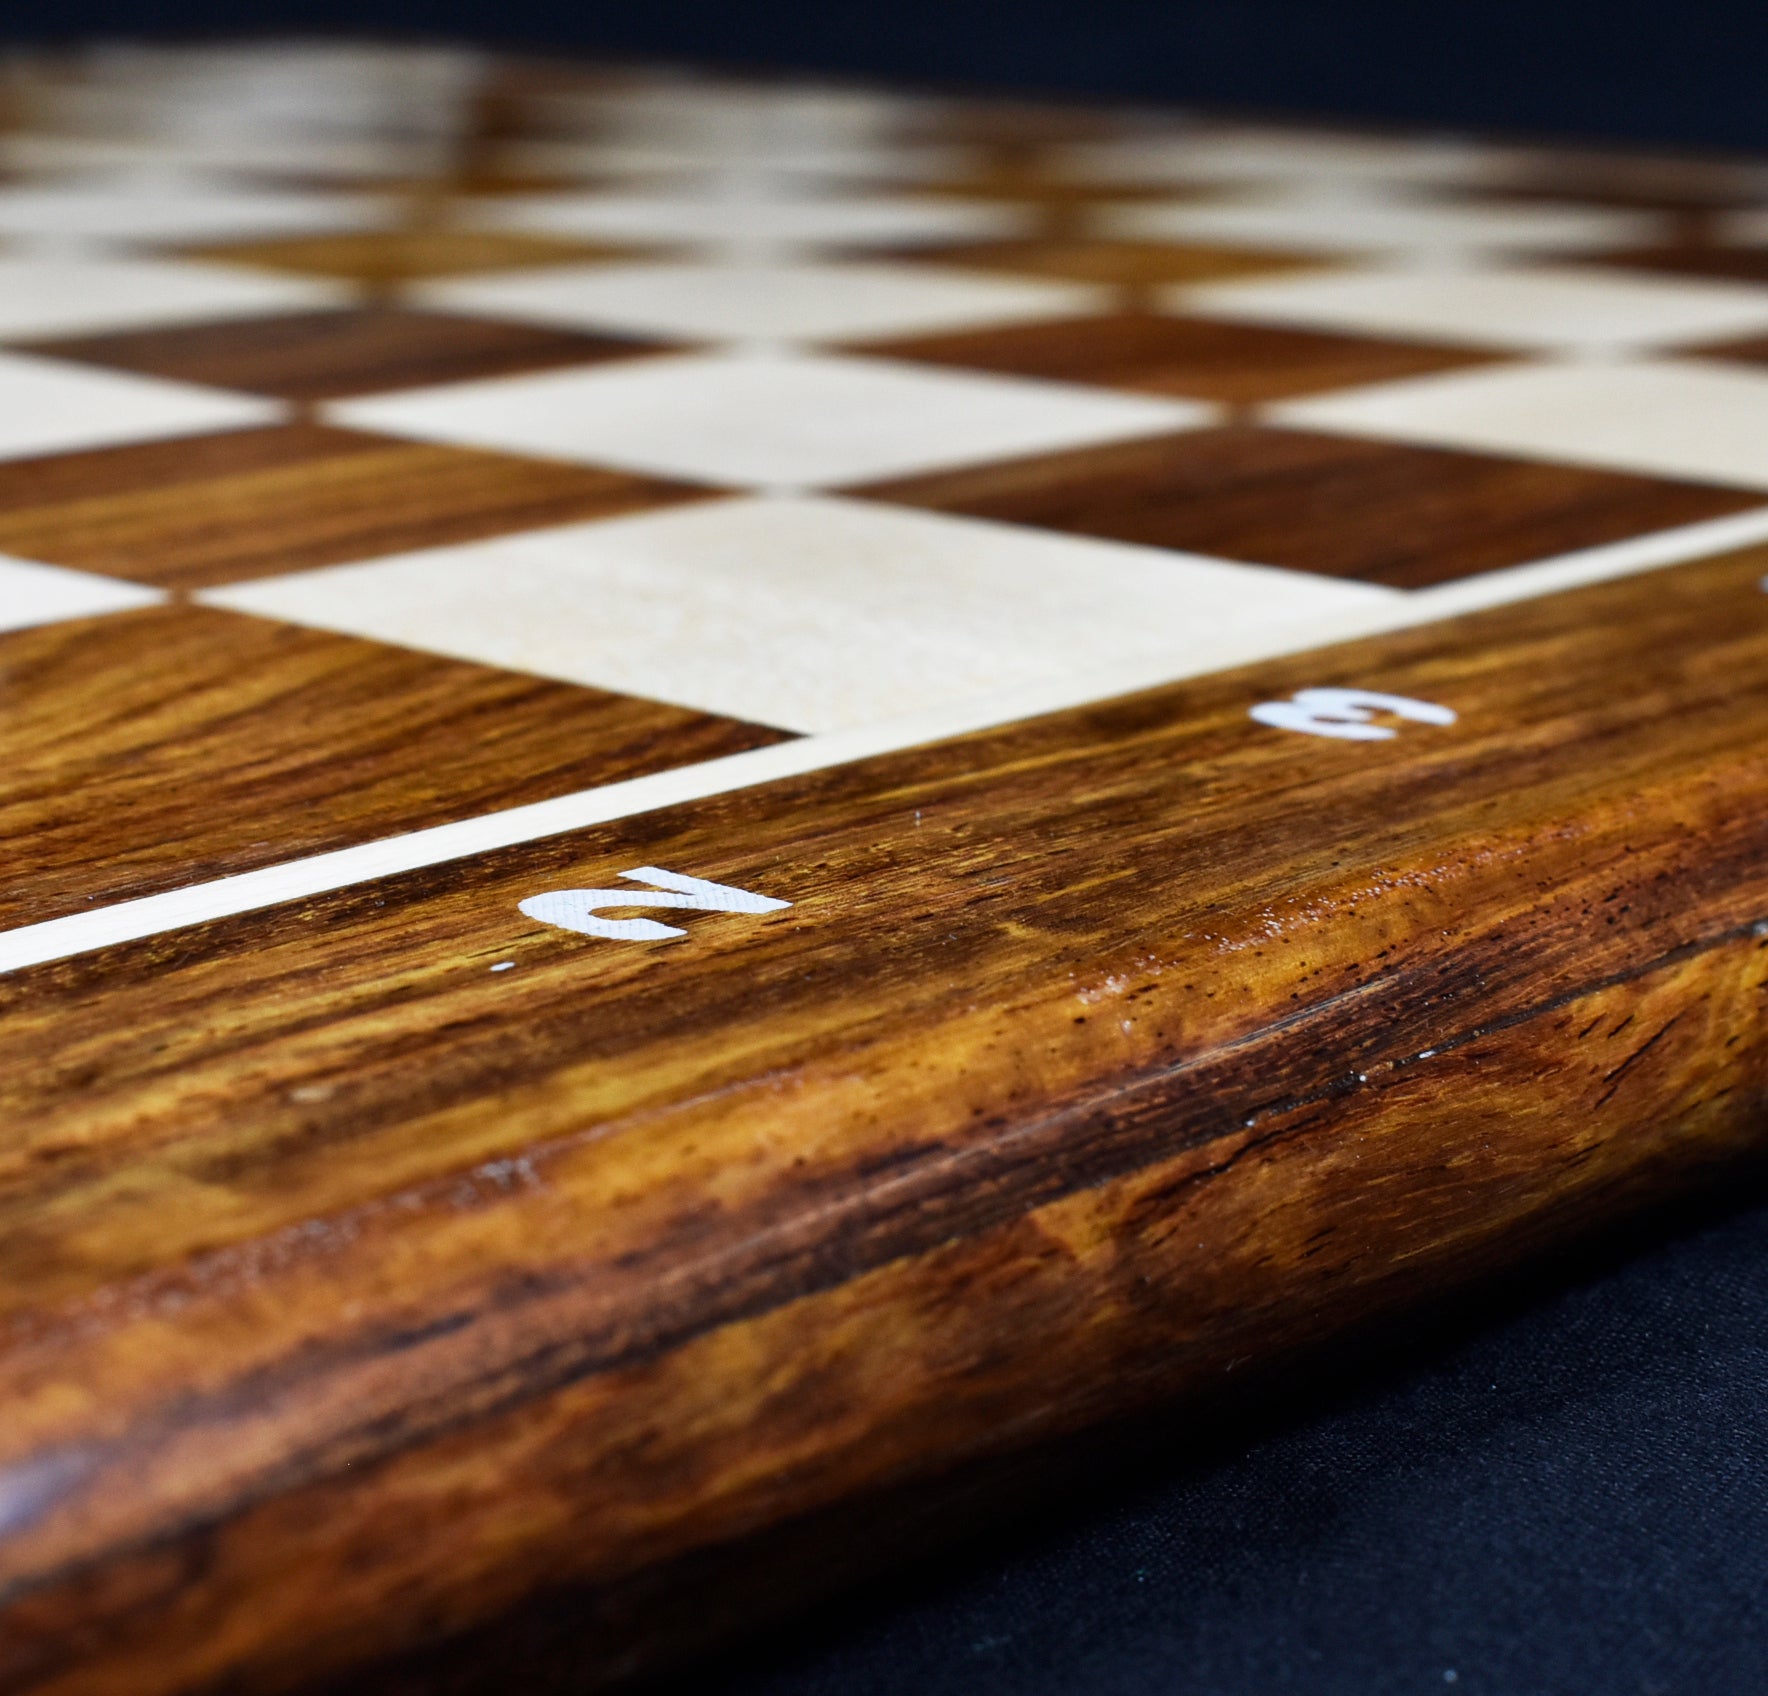 Wood Chess Board - Black Walnut and Curly Maple 2 inch squares